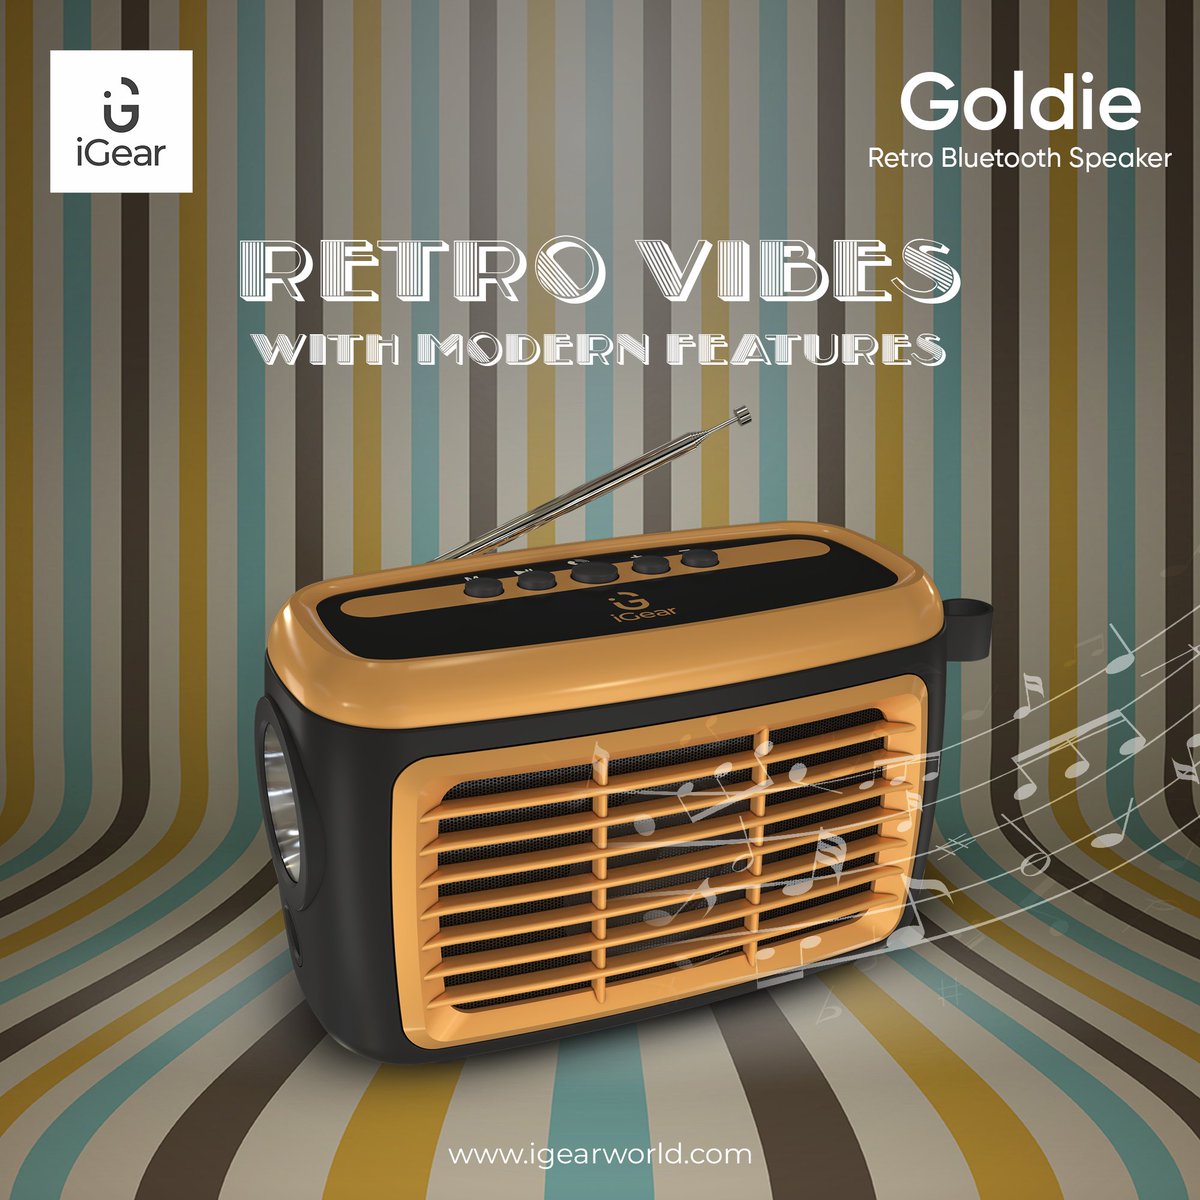 Introducing iGear Goldie, a retro bluetooth speaker packed with features like solar charging, built-in torch and multiple connectivity options making it perfect for outdoor adventures. To buy or know more, visit igearworld.com #iGearWorld #iGearLifestyle #SeriouslySmart